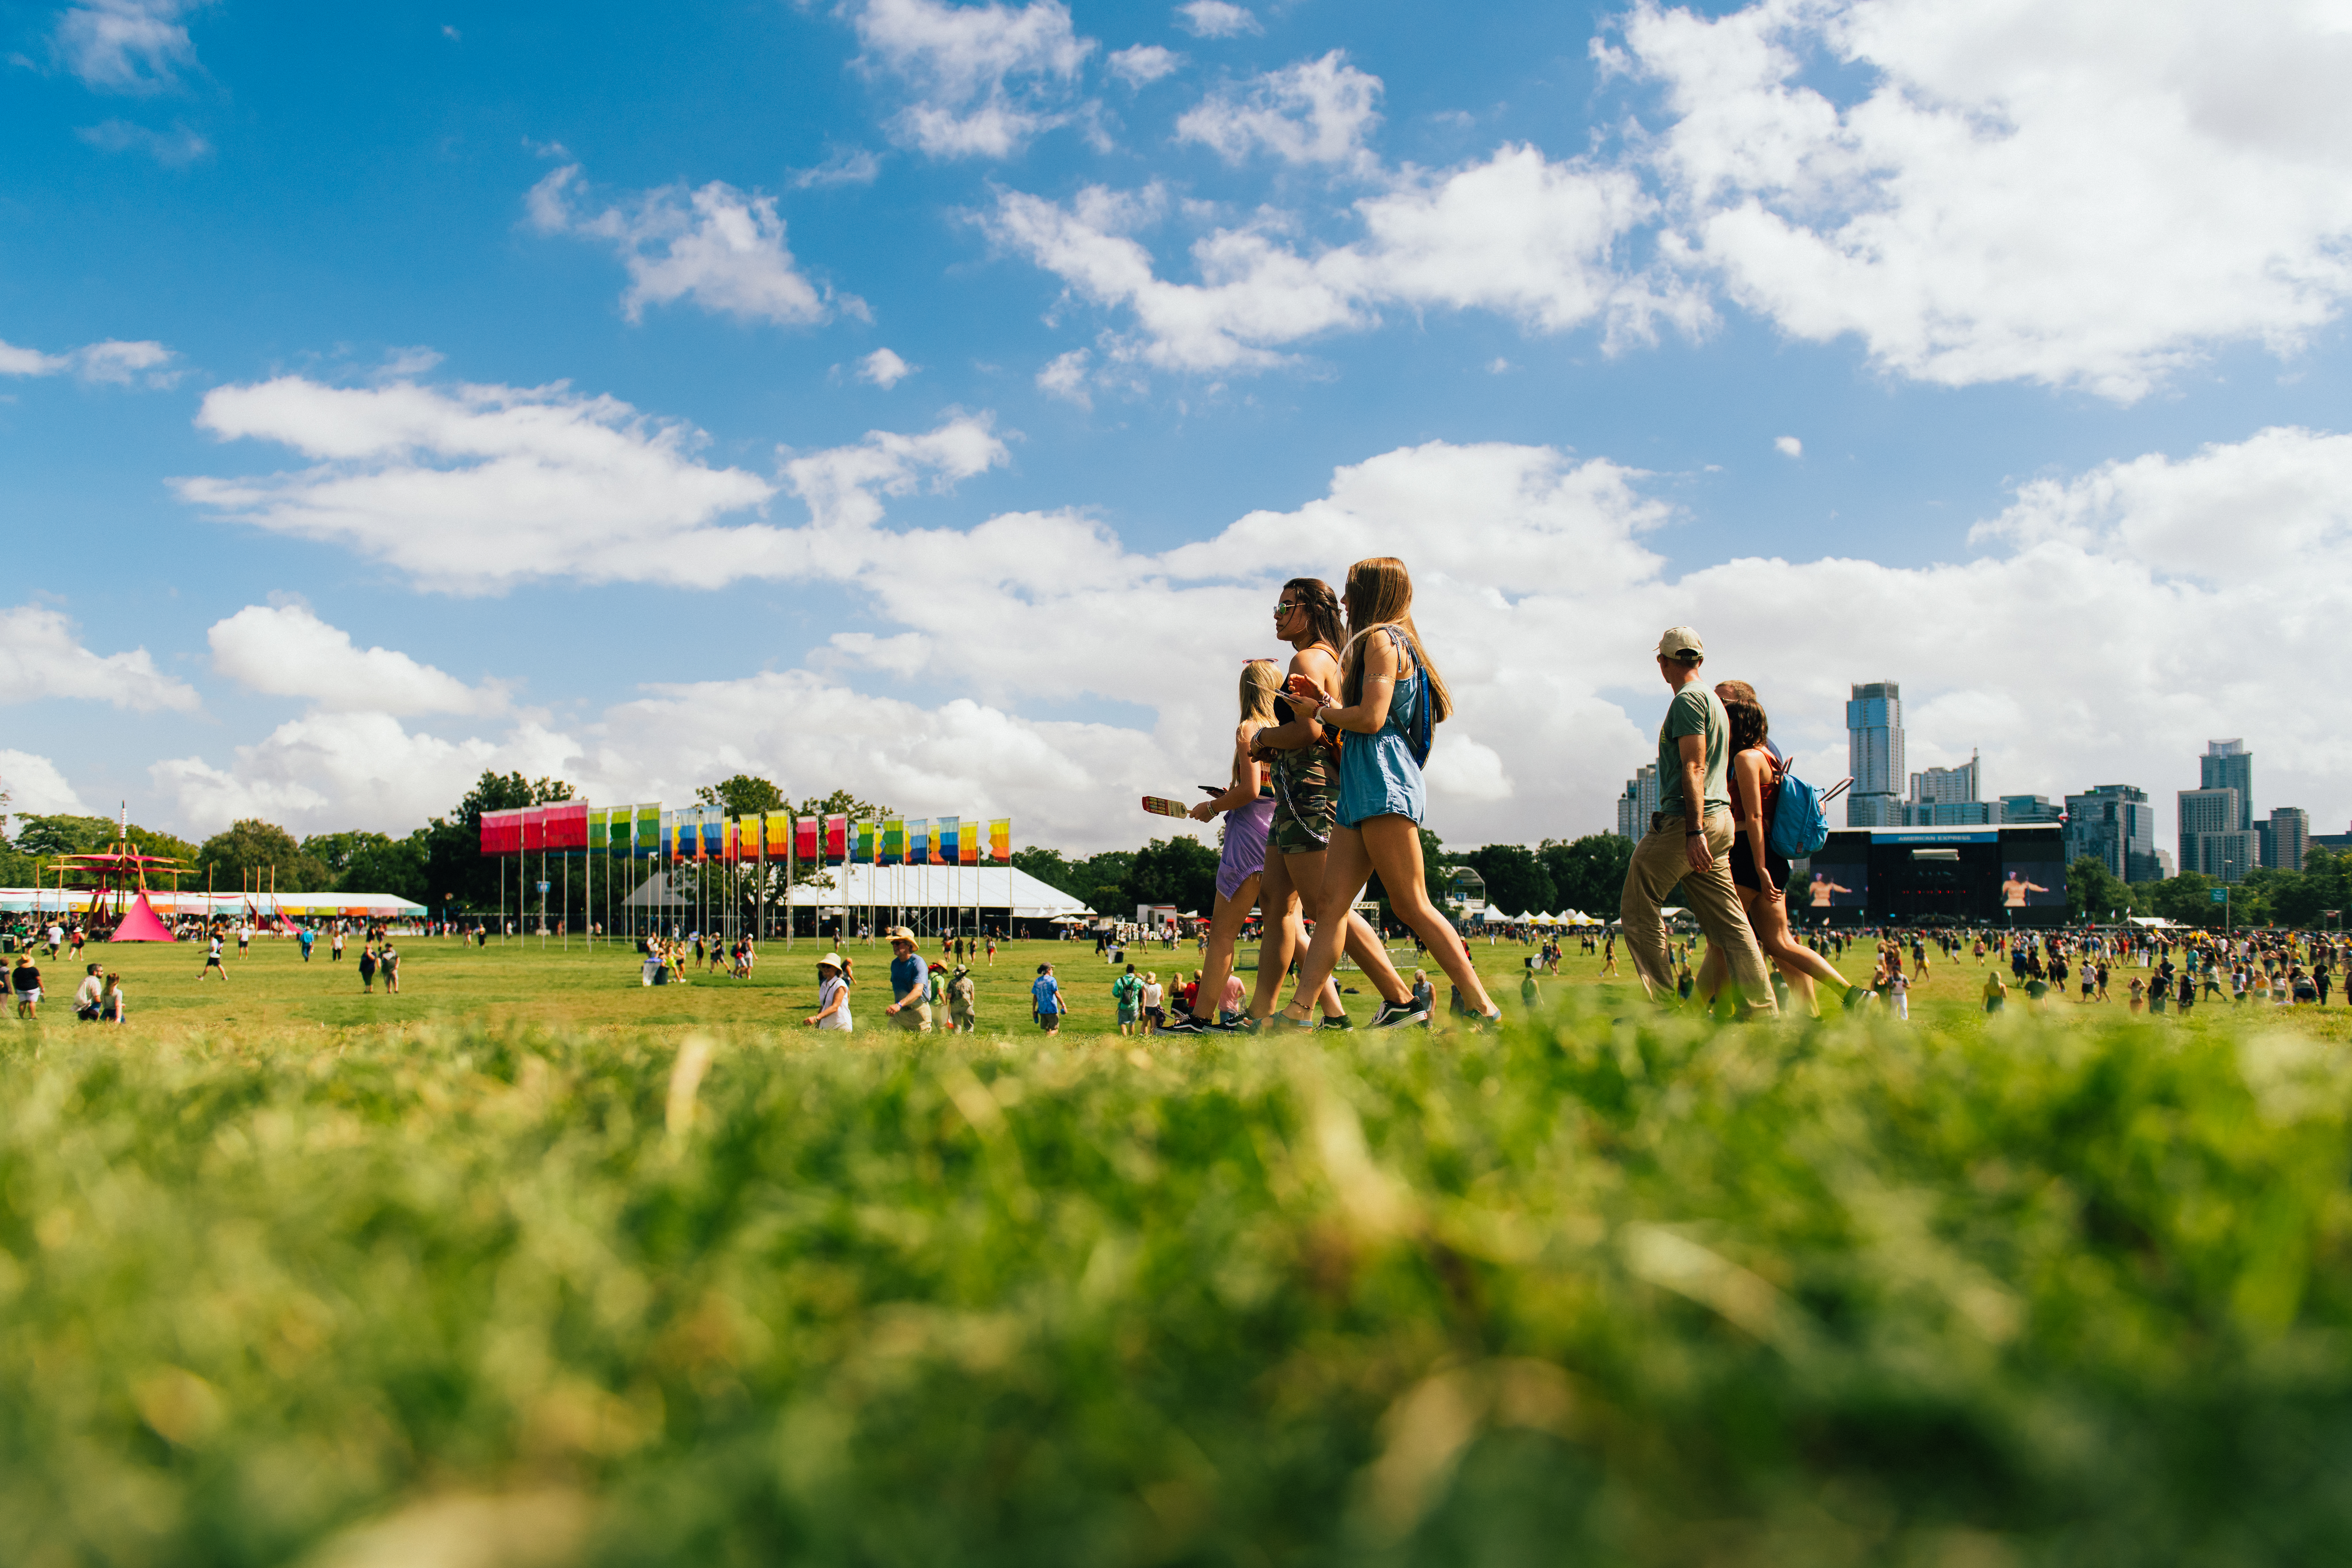 acl festival grounds